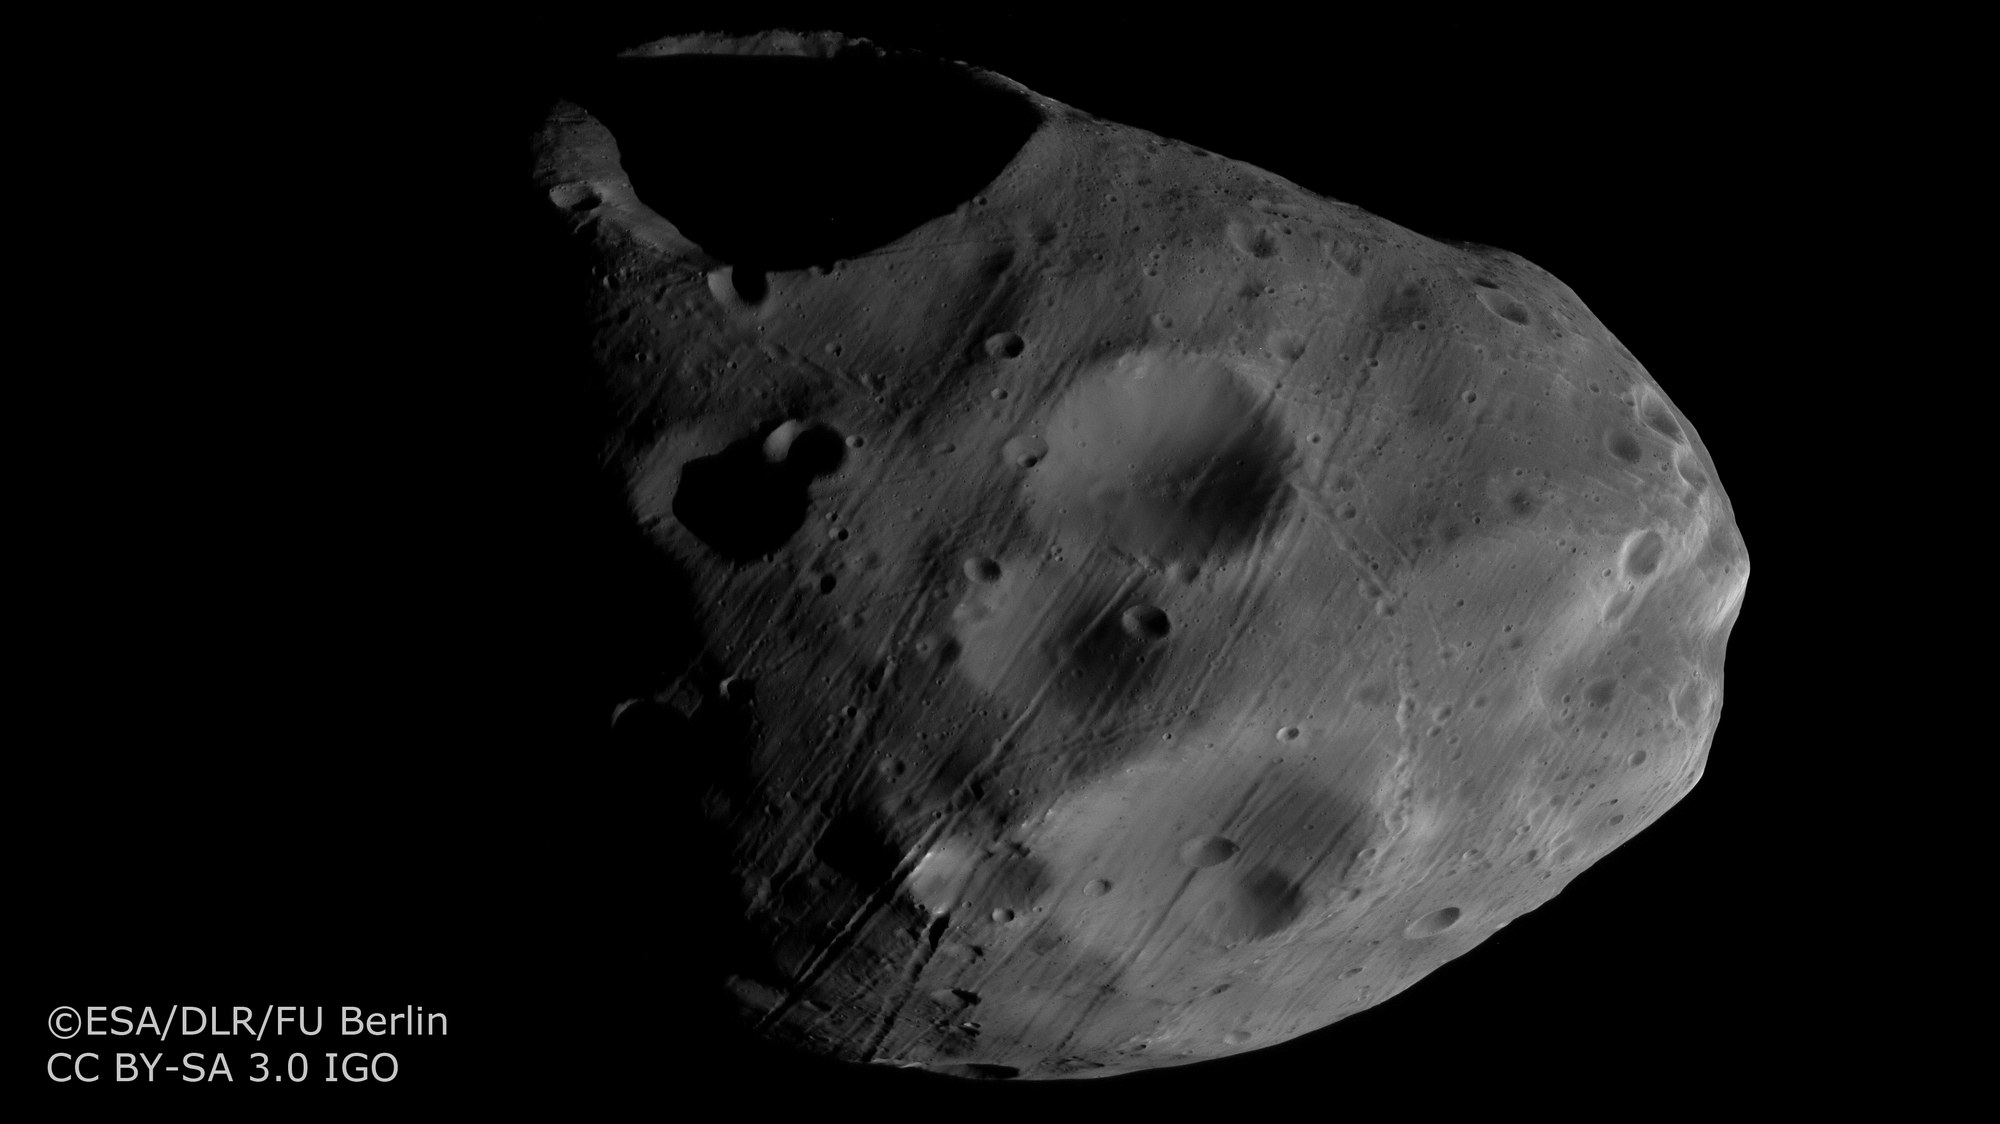 Image of Phobos acquired by the nadir channel of HRSC